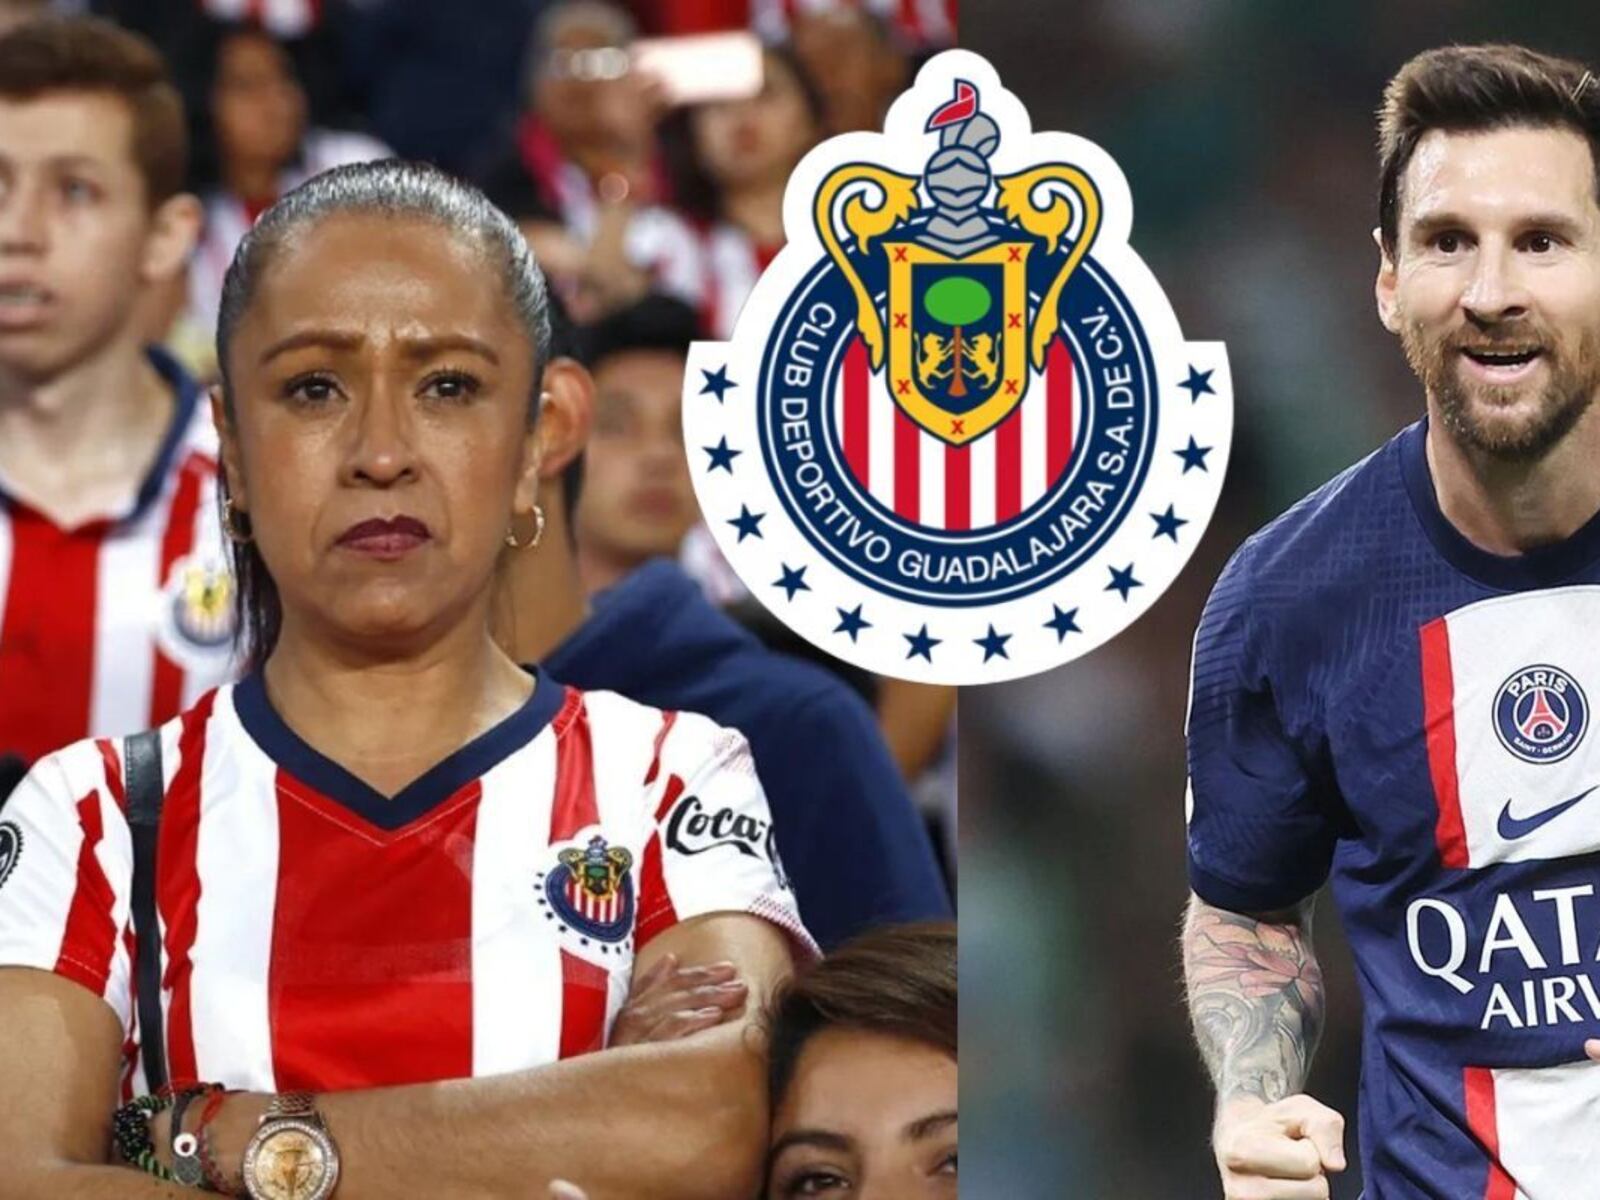 The worst news for Chivas, Messi eould cause the departure of a key piece of the club